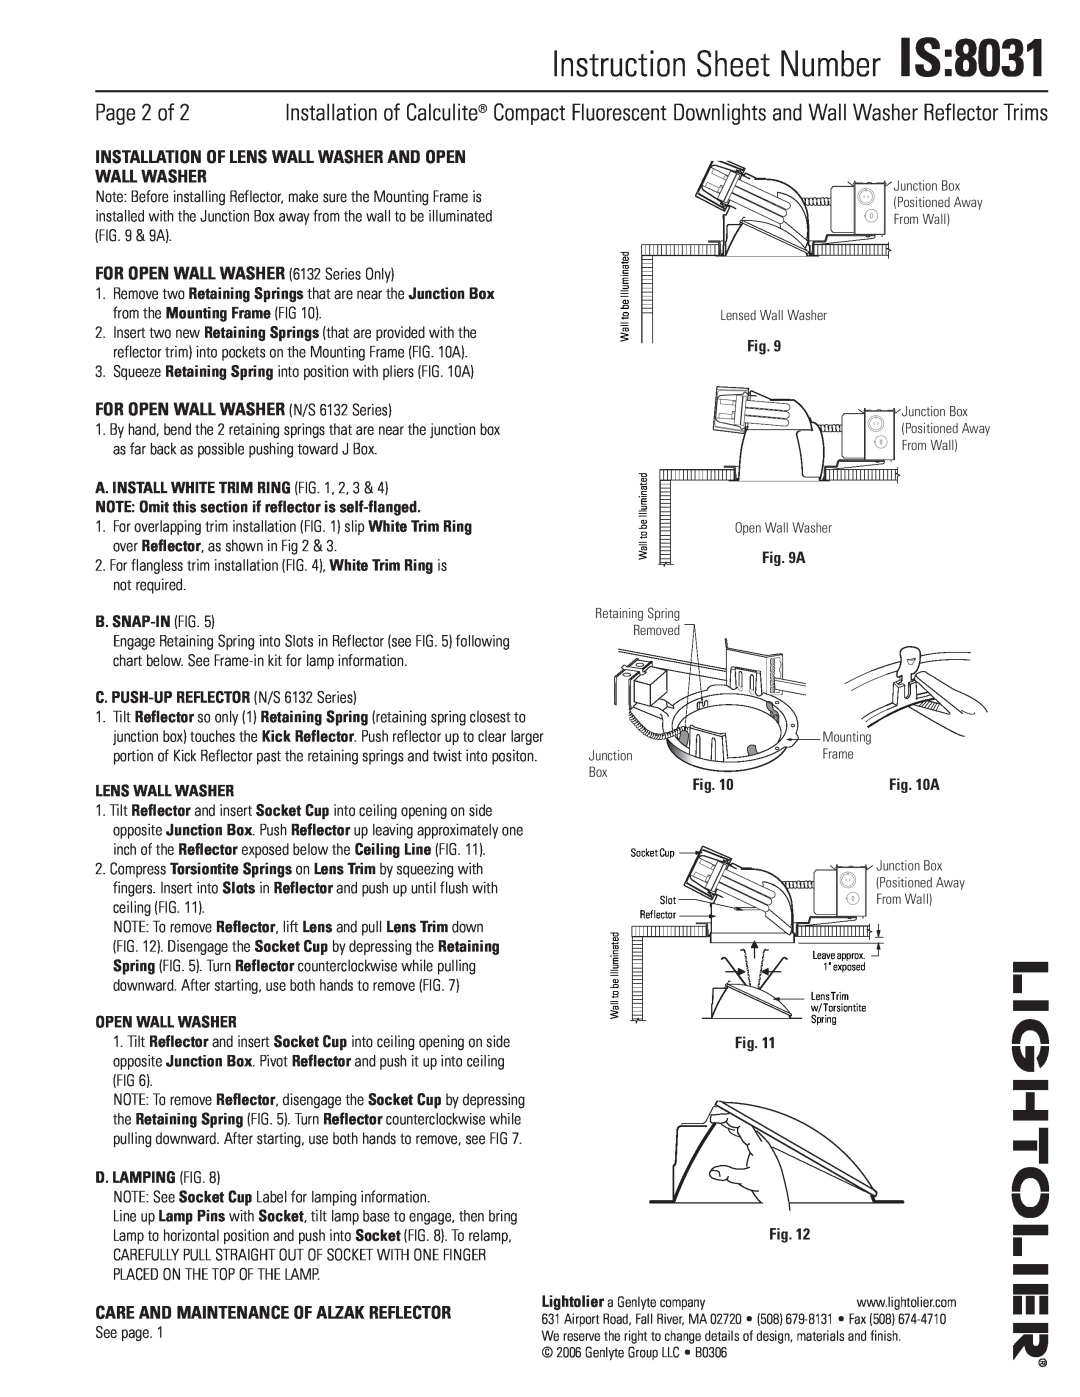 Lightolier 8031 instruction sheet Page 2 of, FOR OPEN WALL WASHER 6132 Series Only, FOR OPEN WALL WASHER N/S 6132 Series 